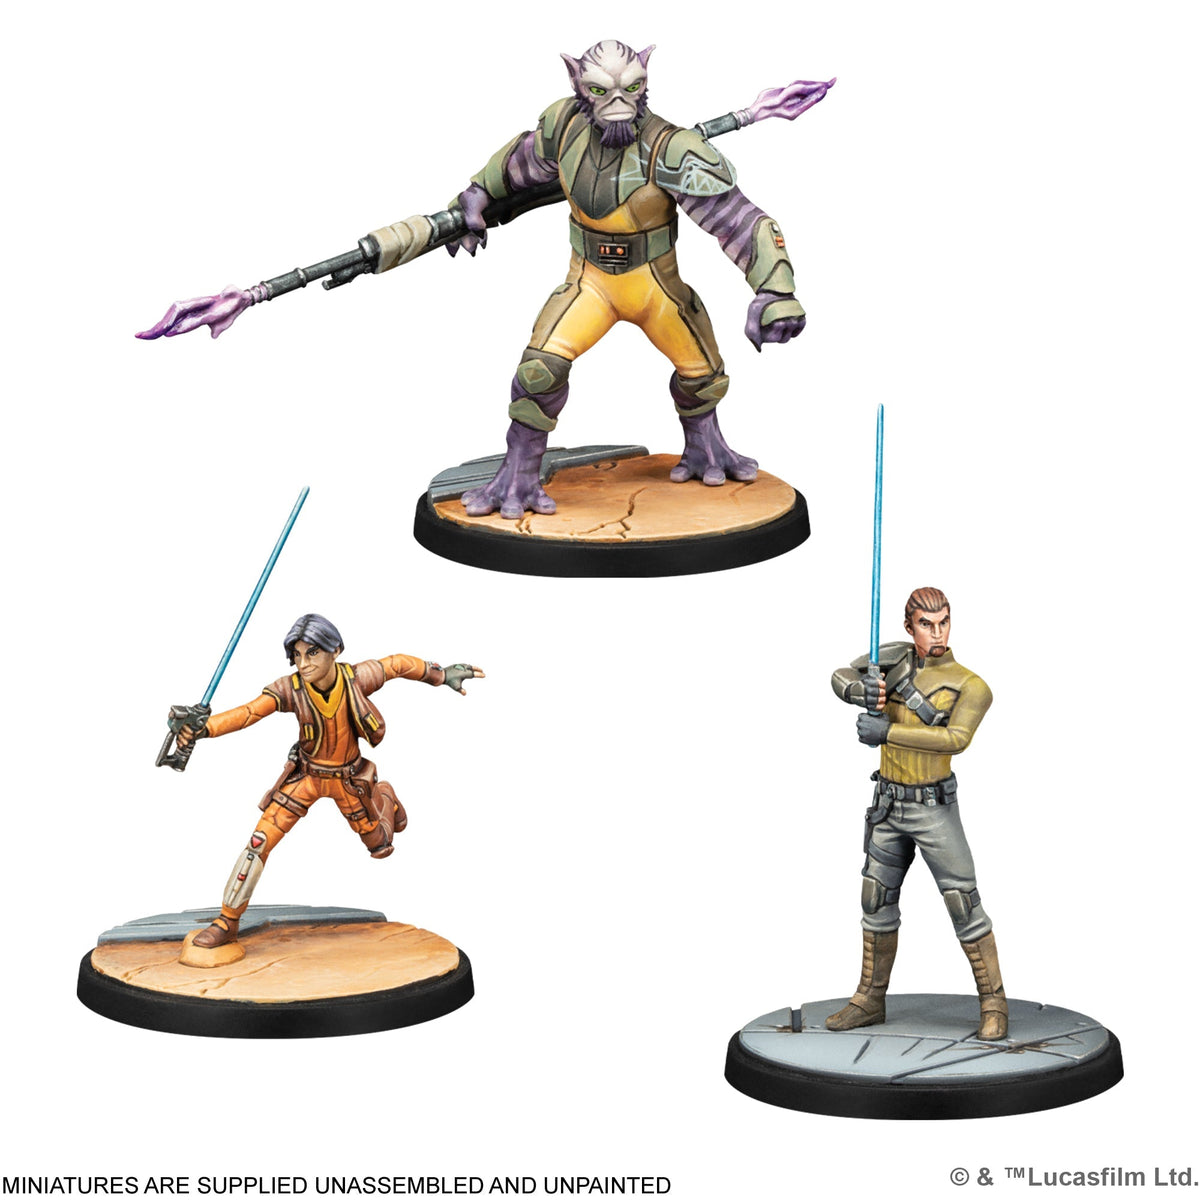 Stronger Than Fear Squad Pack (Star Wars: Shatterpoint)